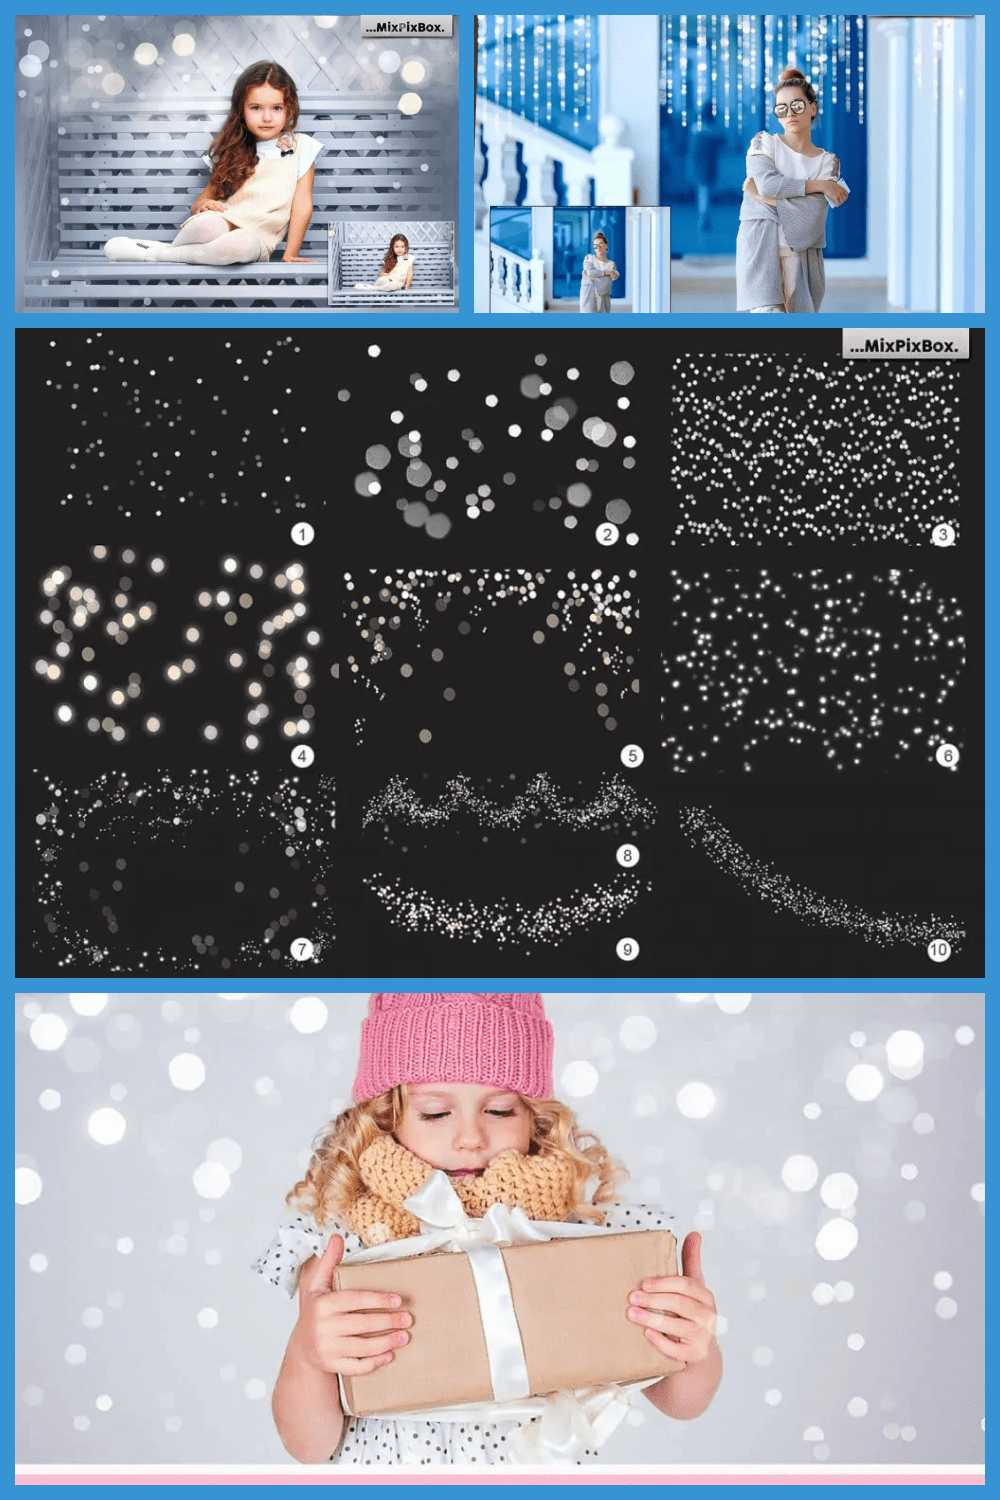 collage with photos of girls and a woman, and twinkling lights on a black background.